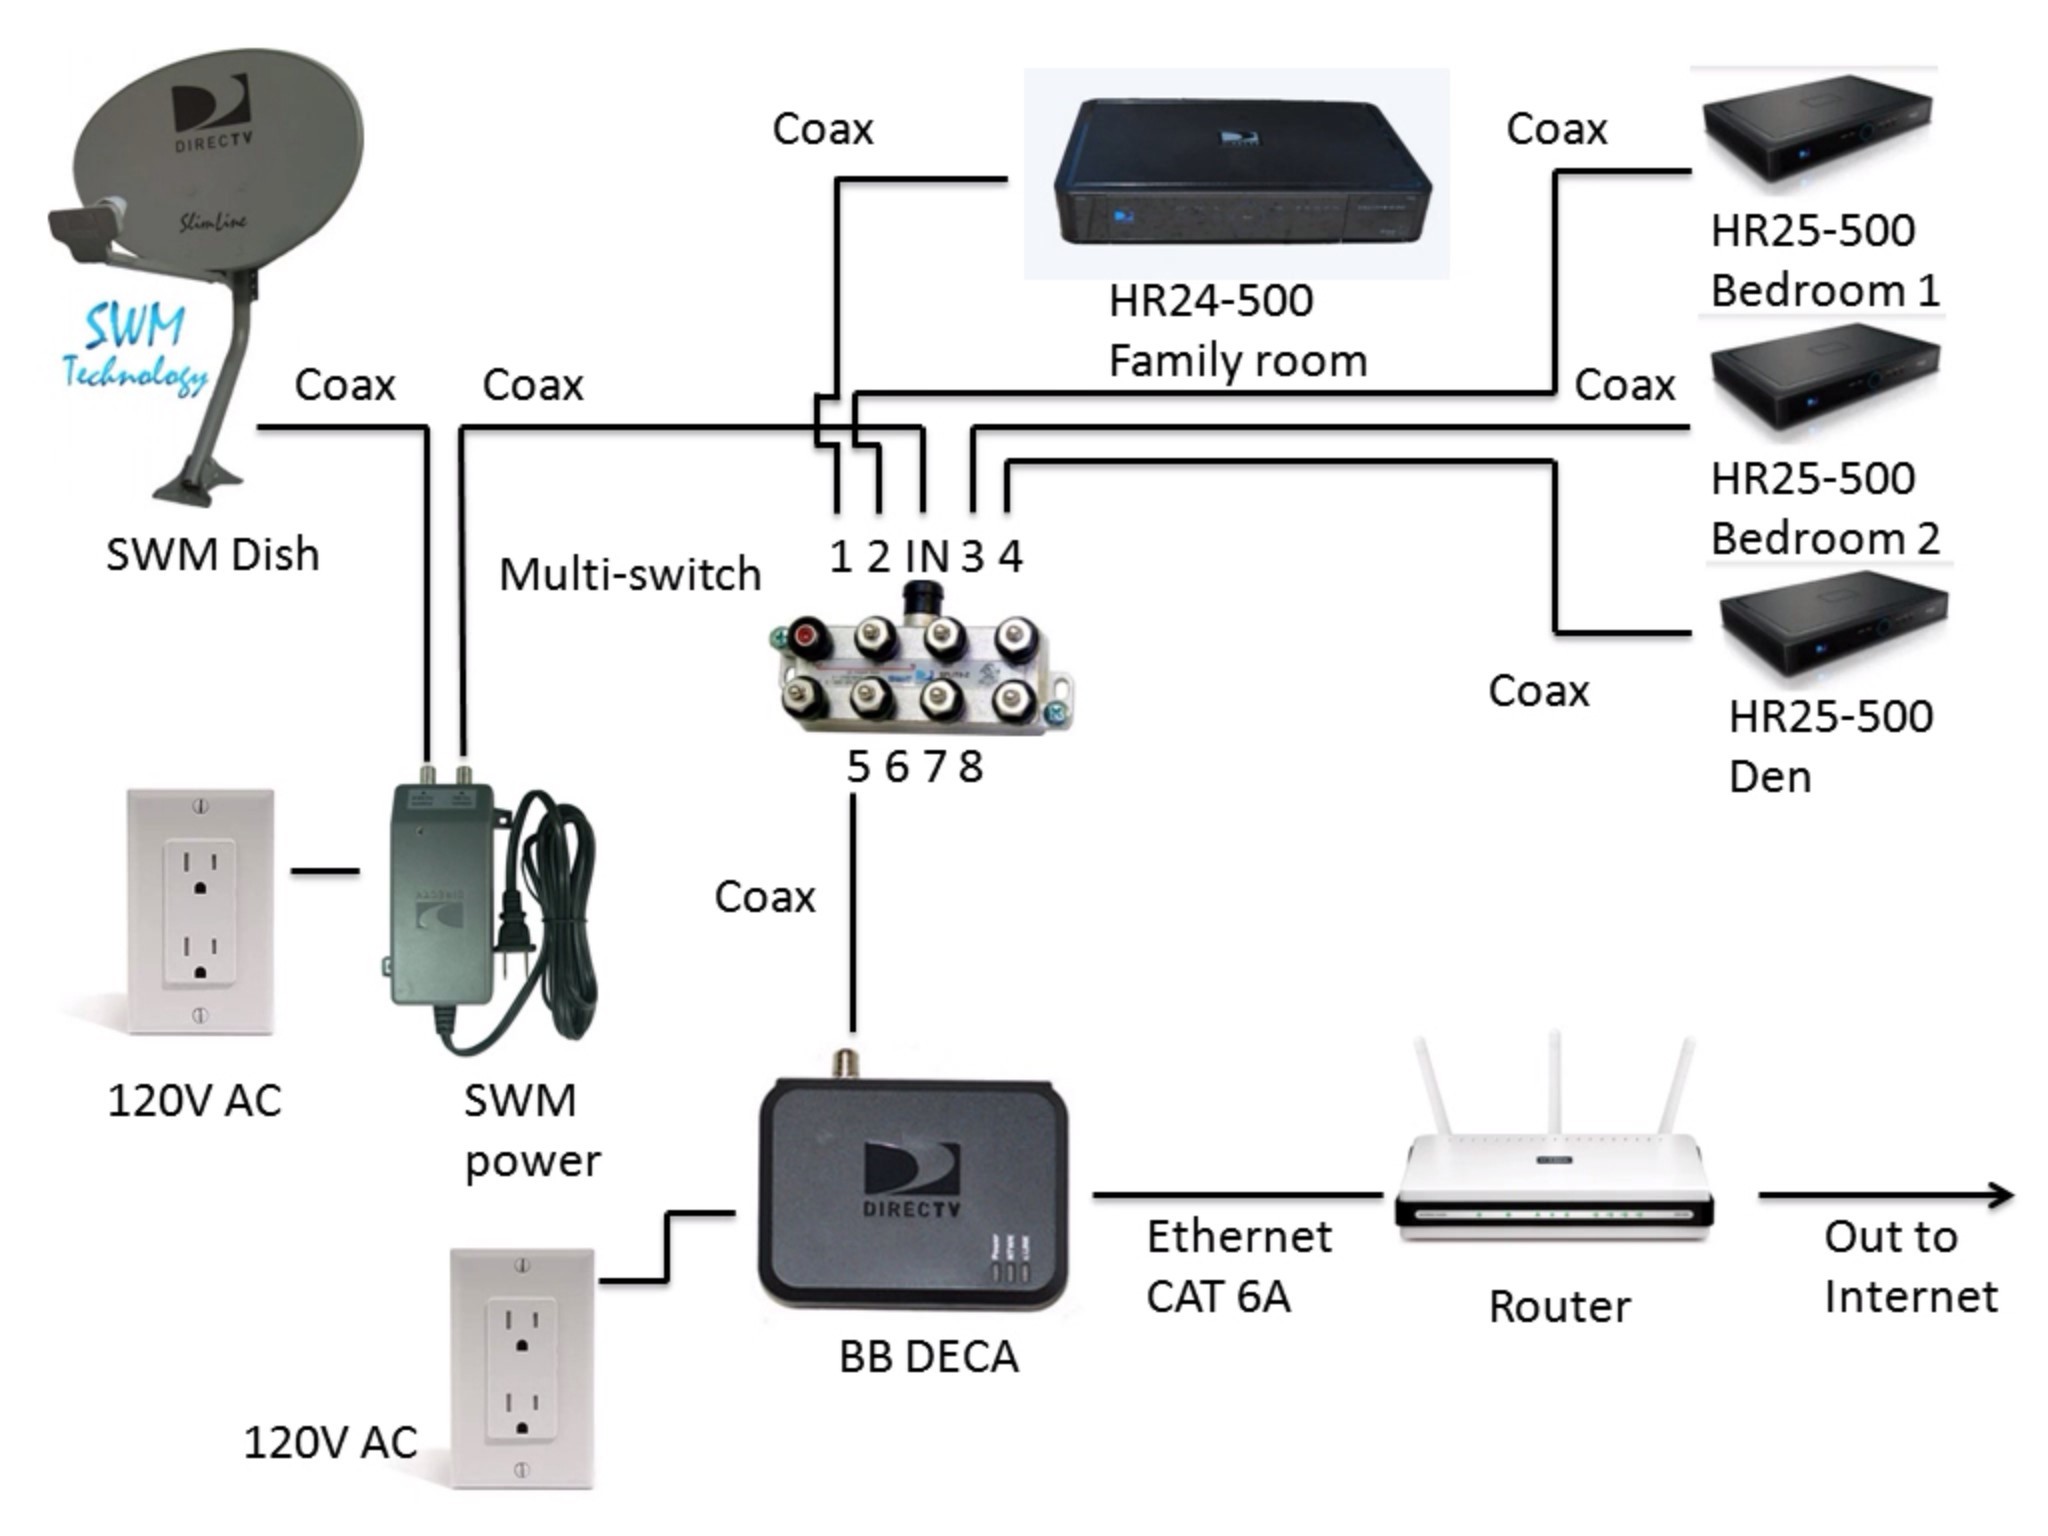 Satellite Tv Wiring Diagrams fitfathers